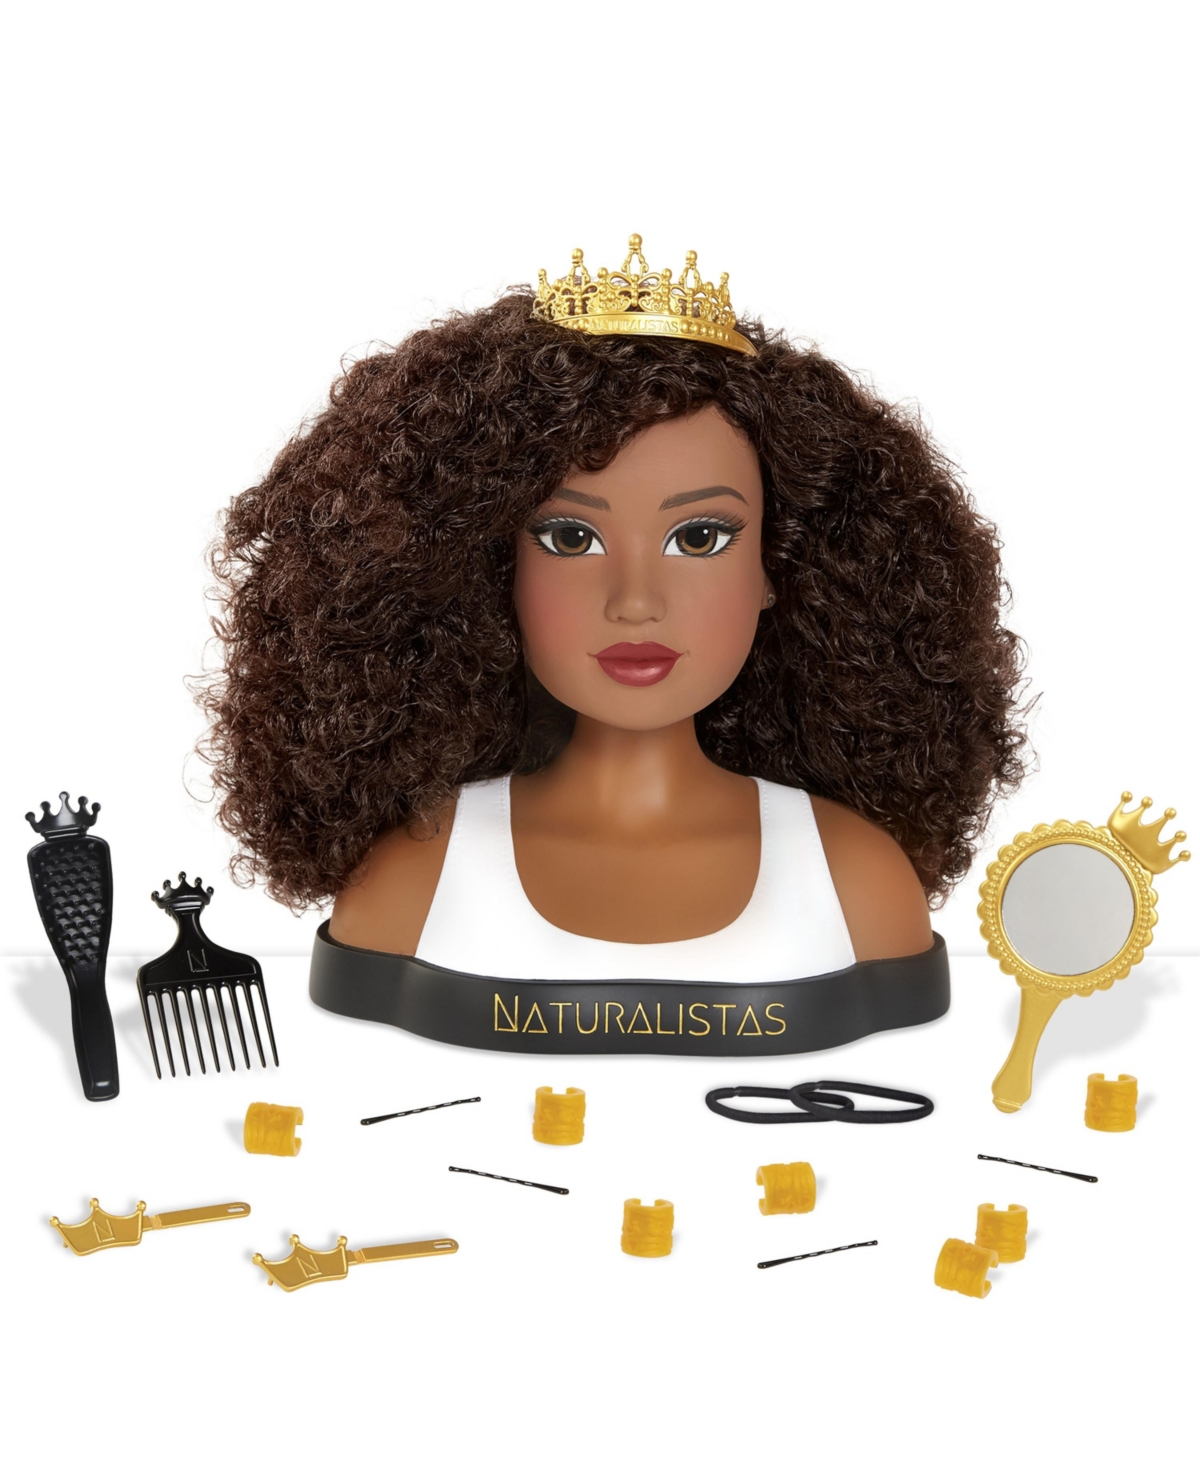 Naturalistas Kids' Dayna Deluxe Crown And Curls Fashion Styling Head, 3c Textured Hair, 19 Accessories In Multi